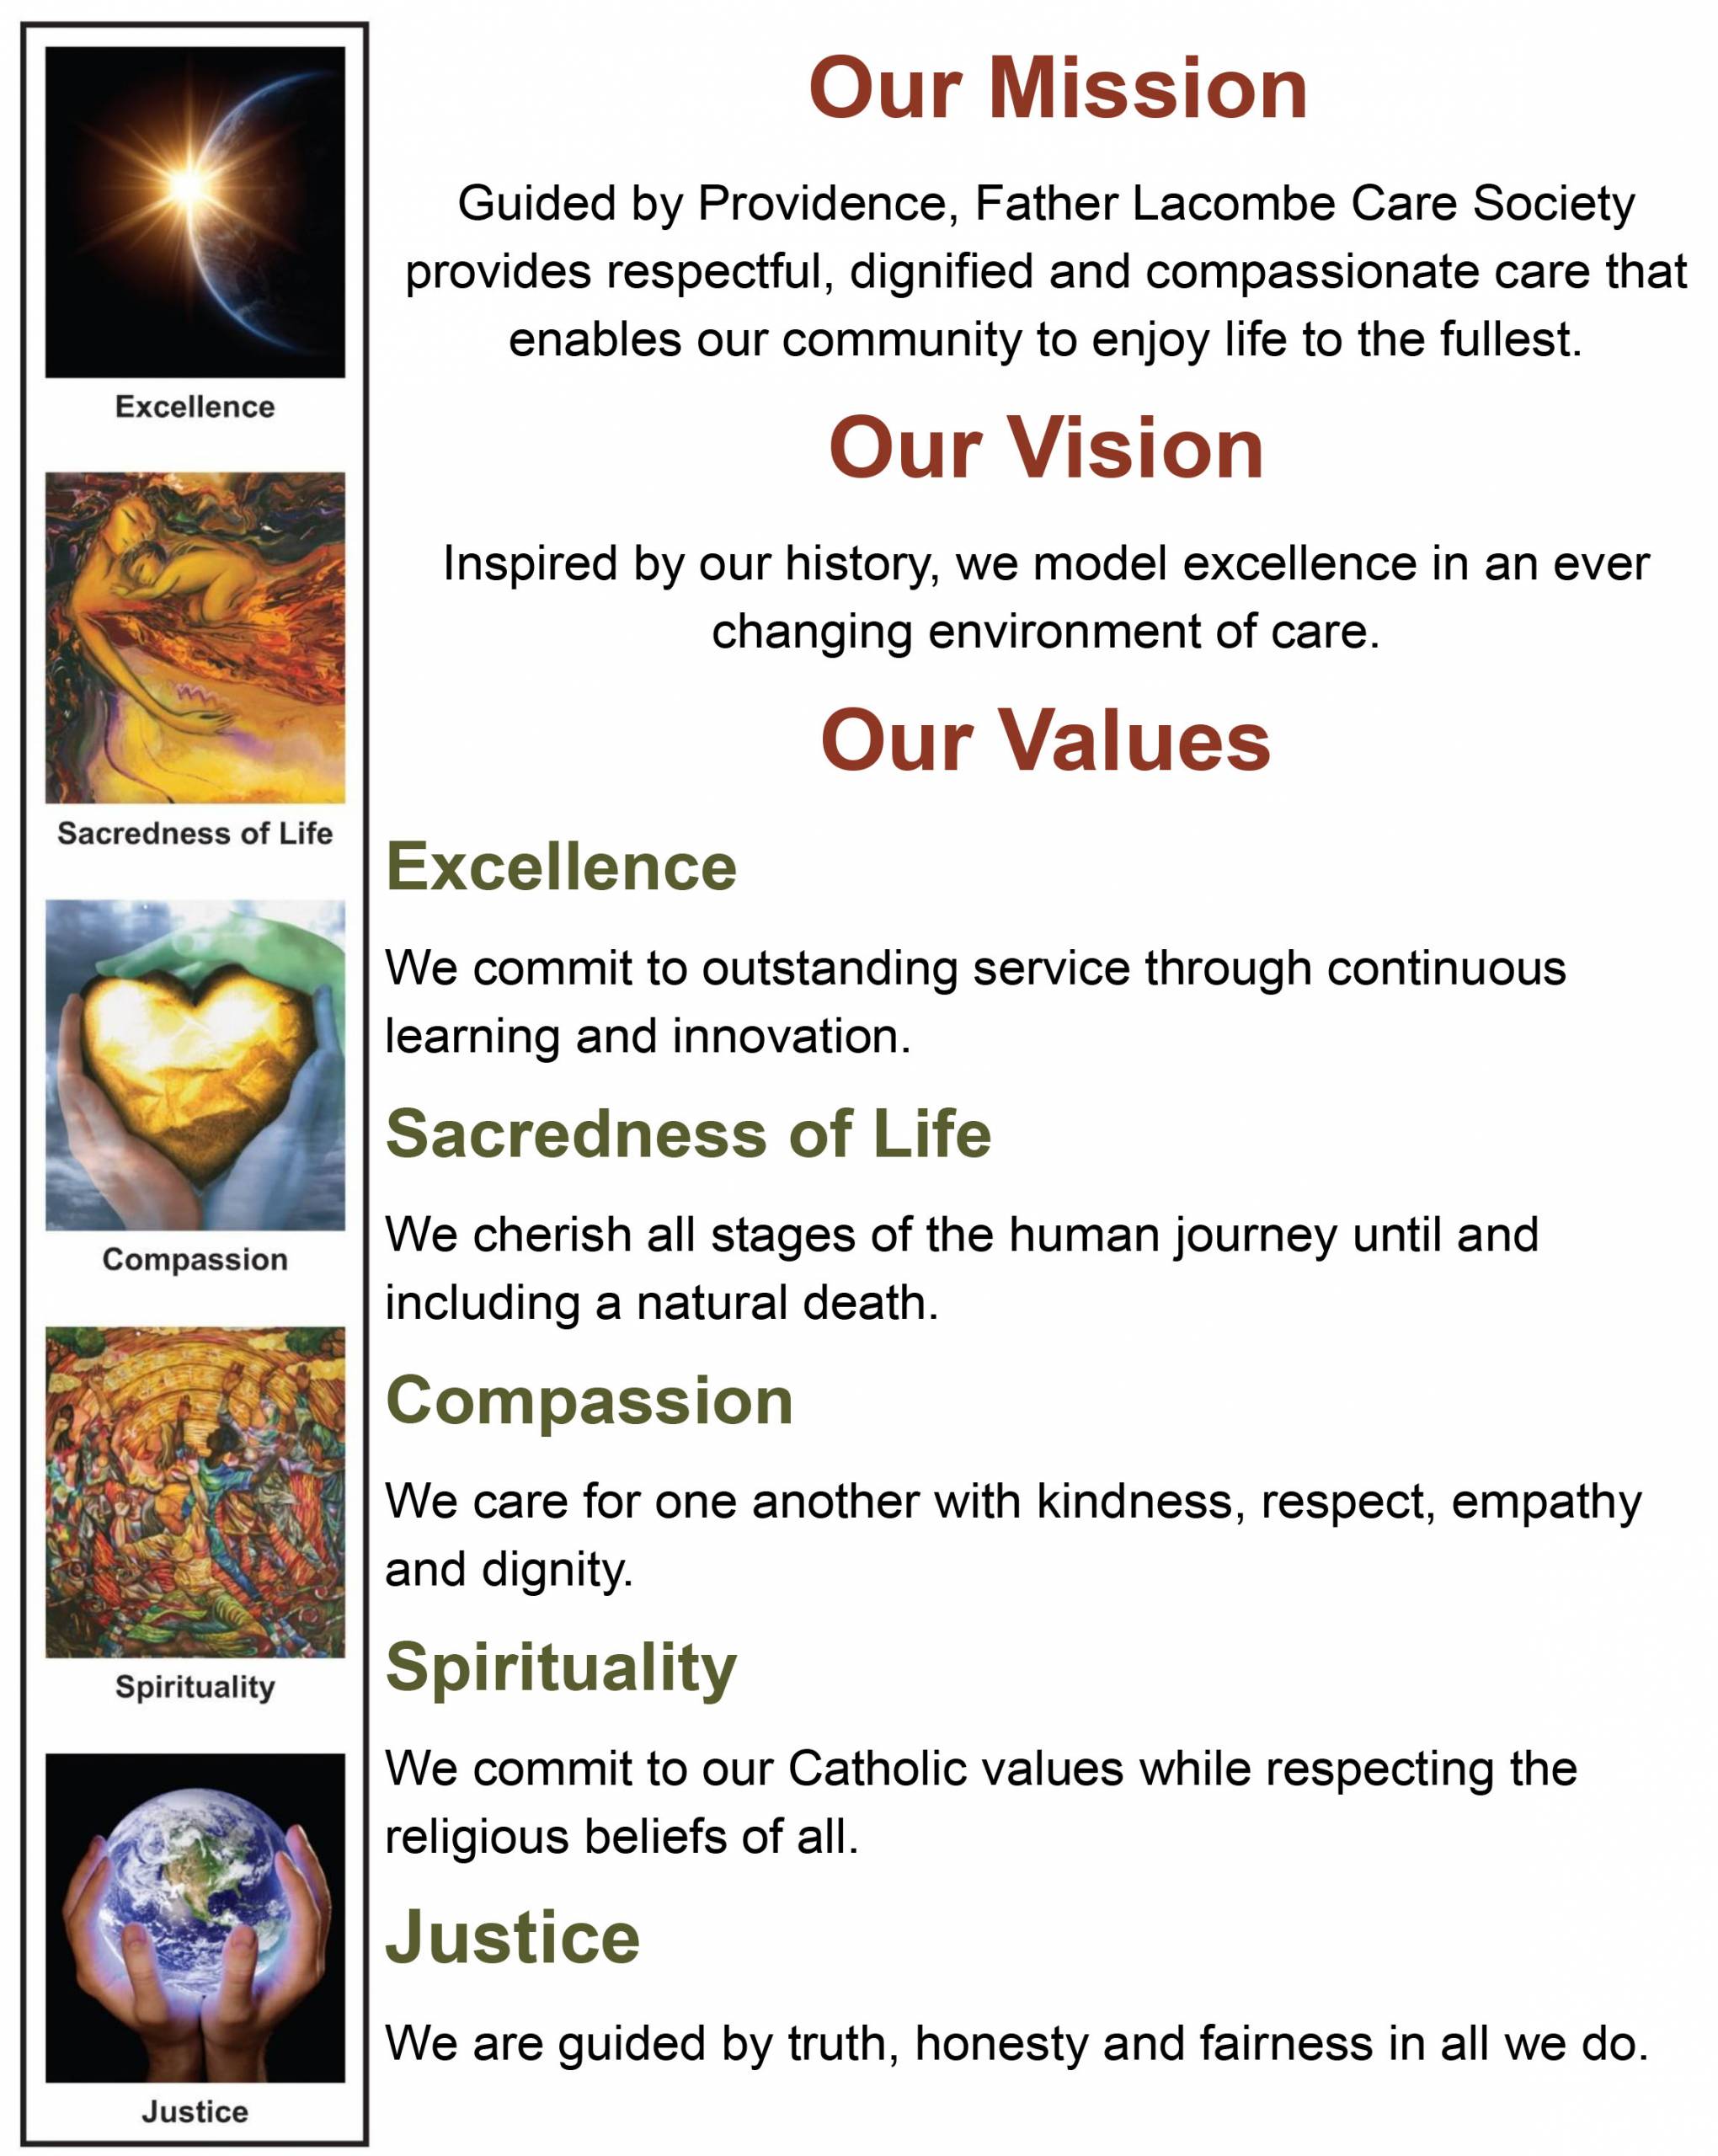 Father Lacombe Care Society Mission and Values